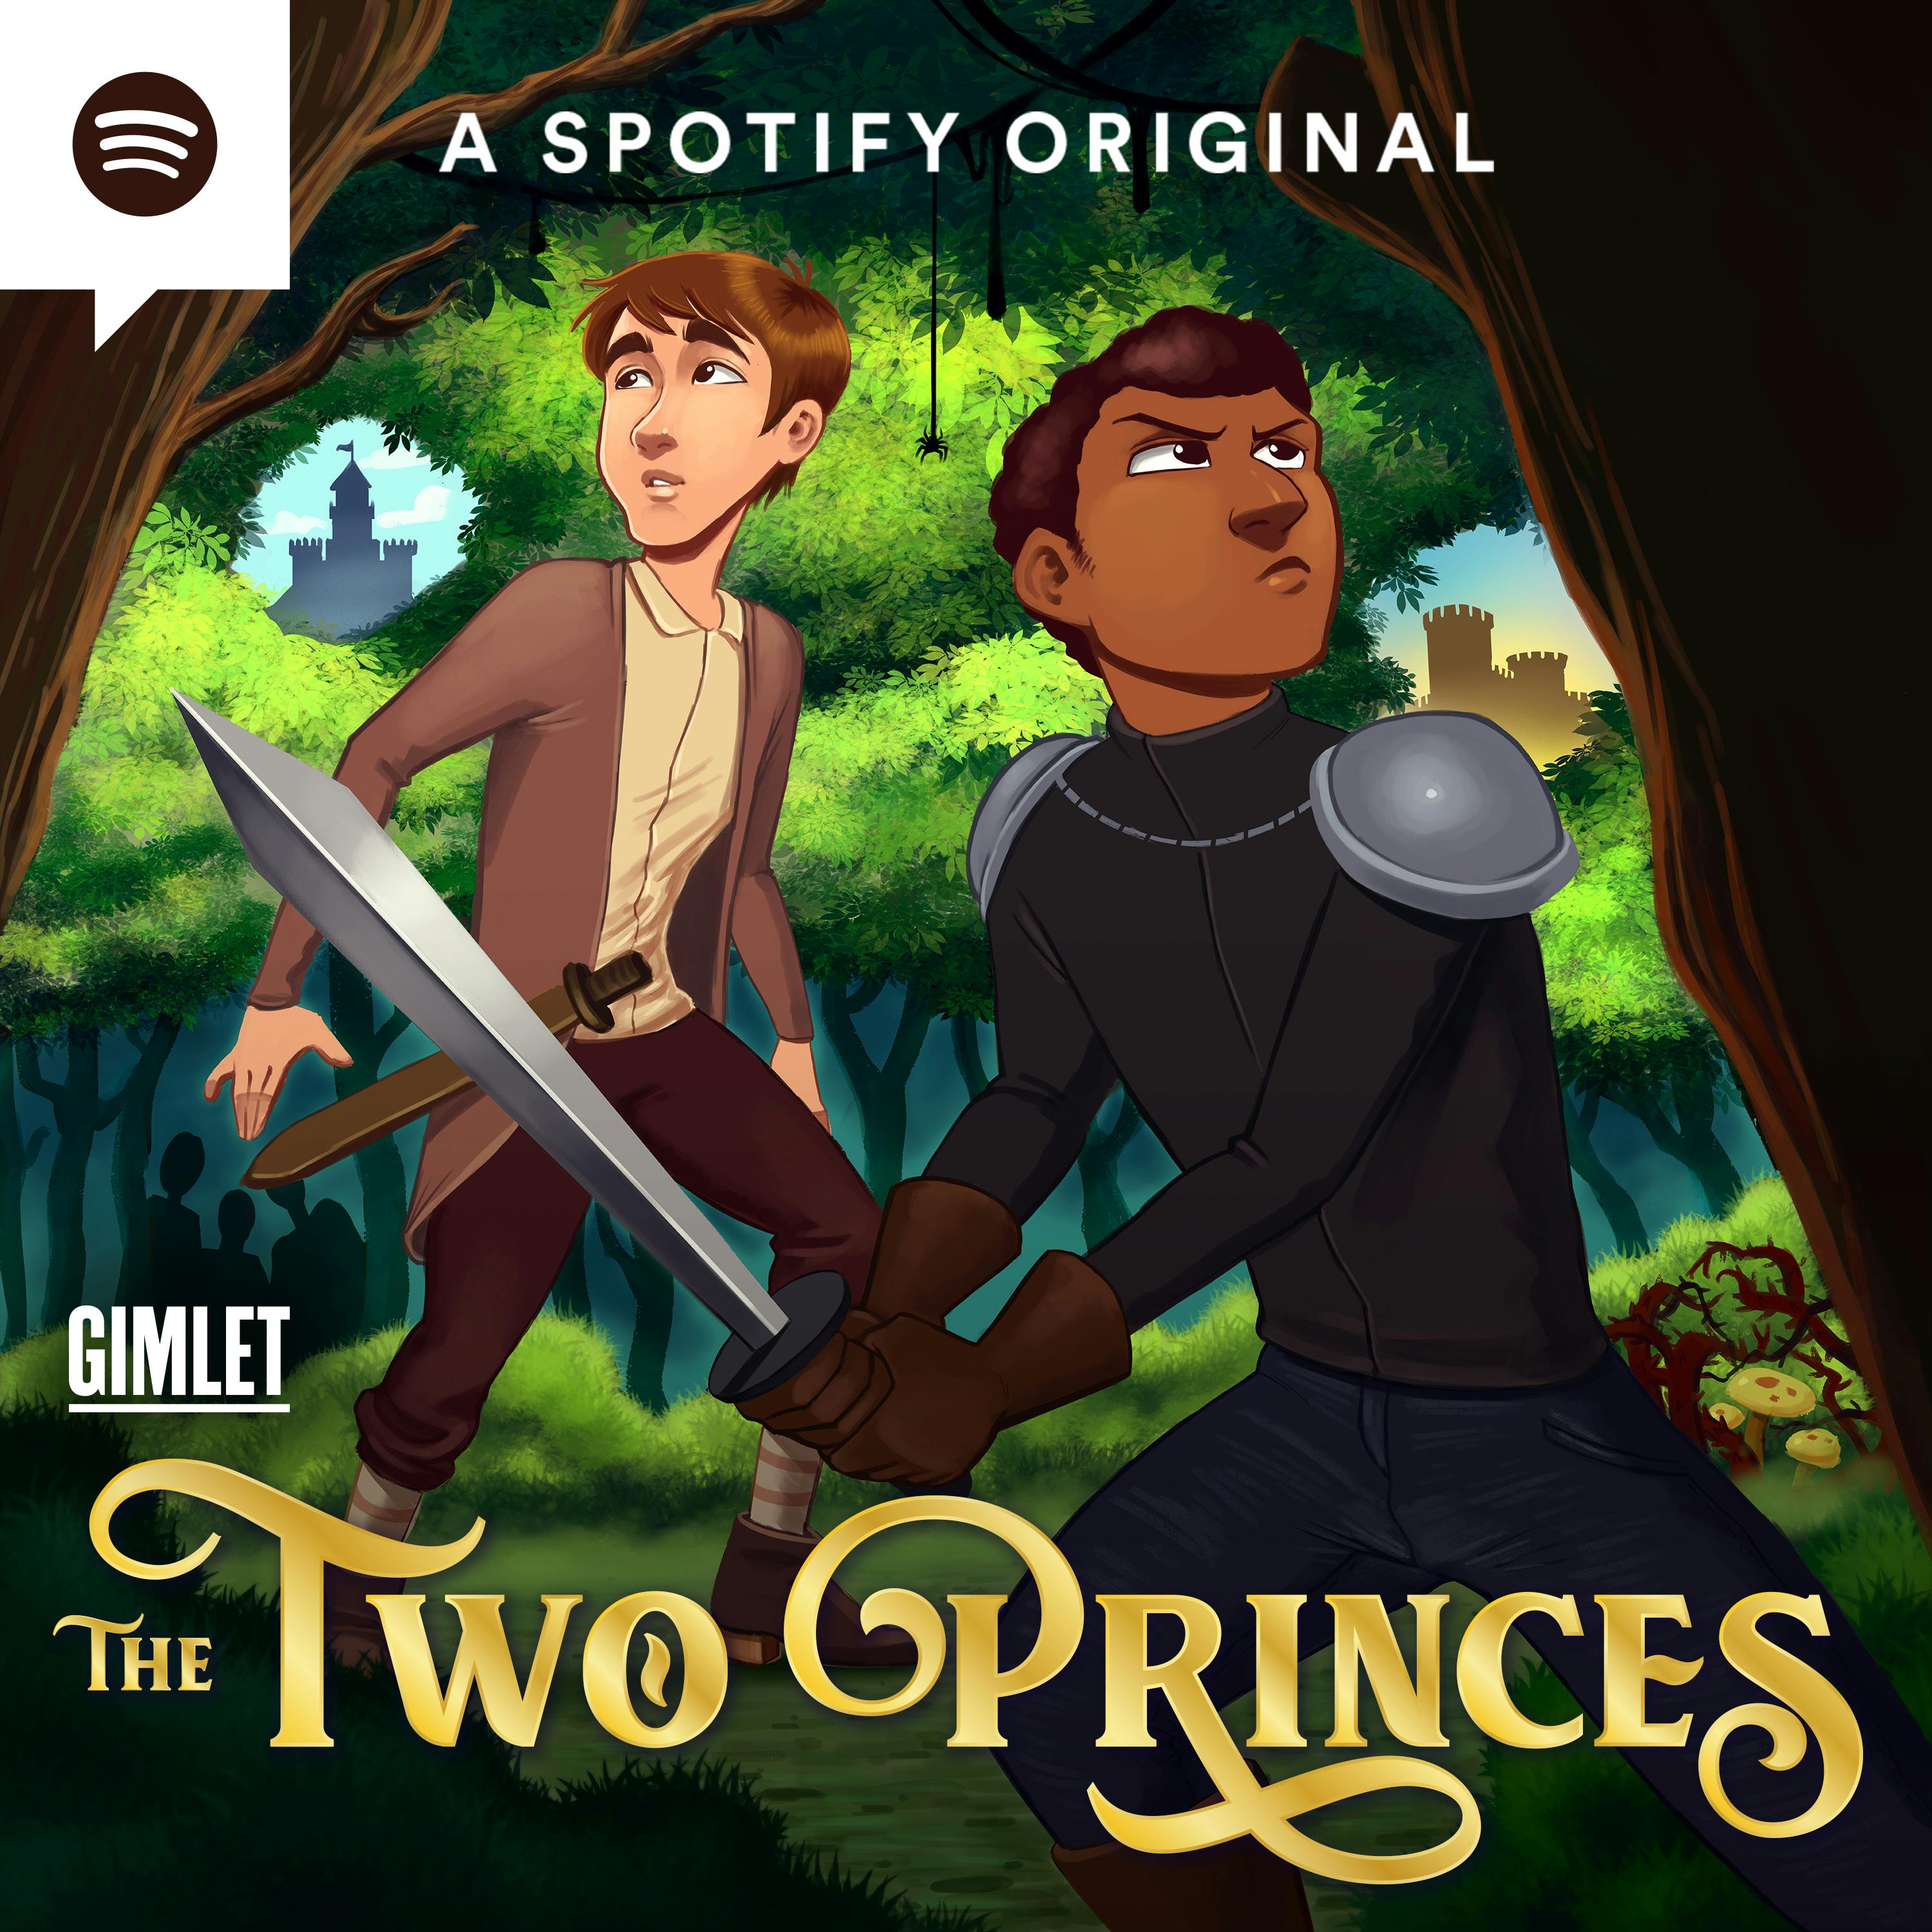 Introducing: The Two Princes